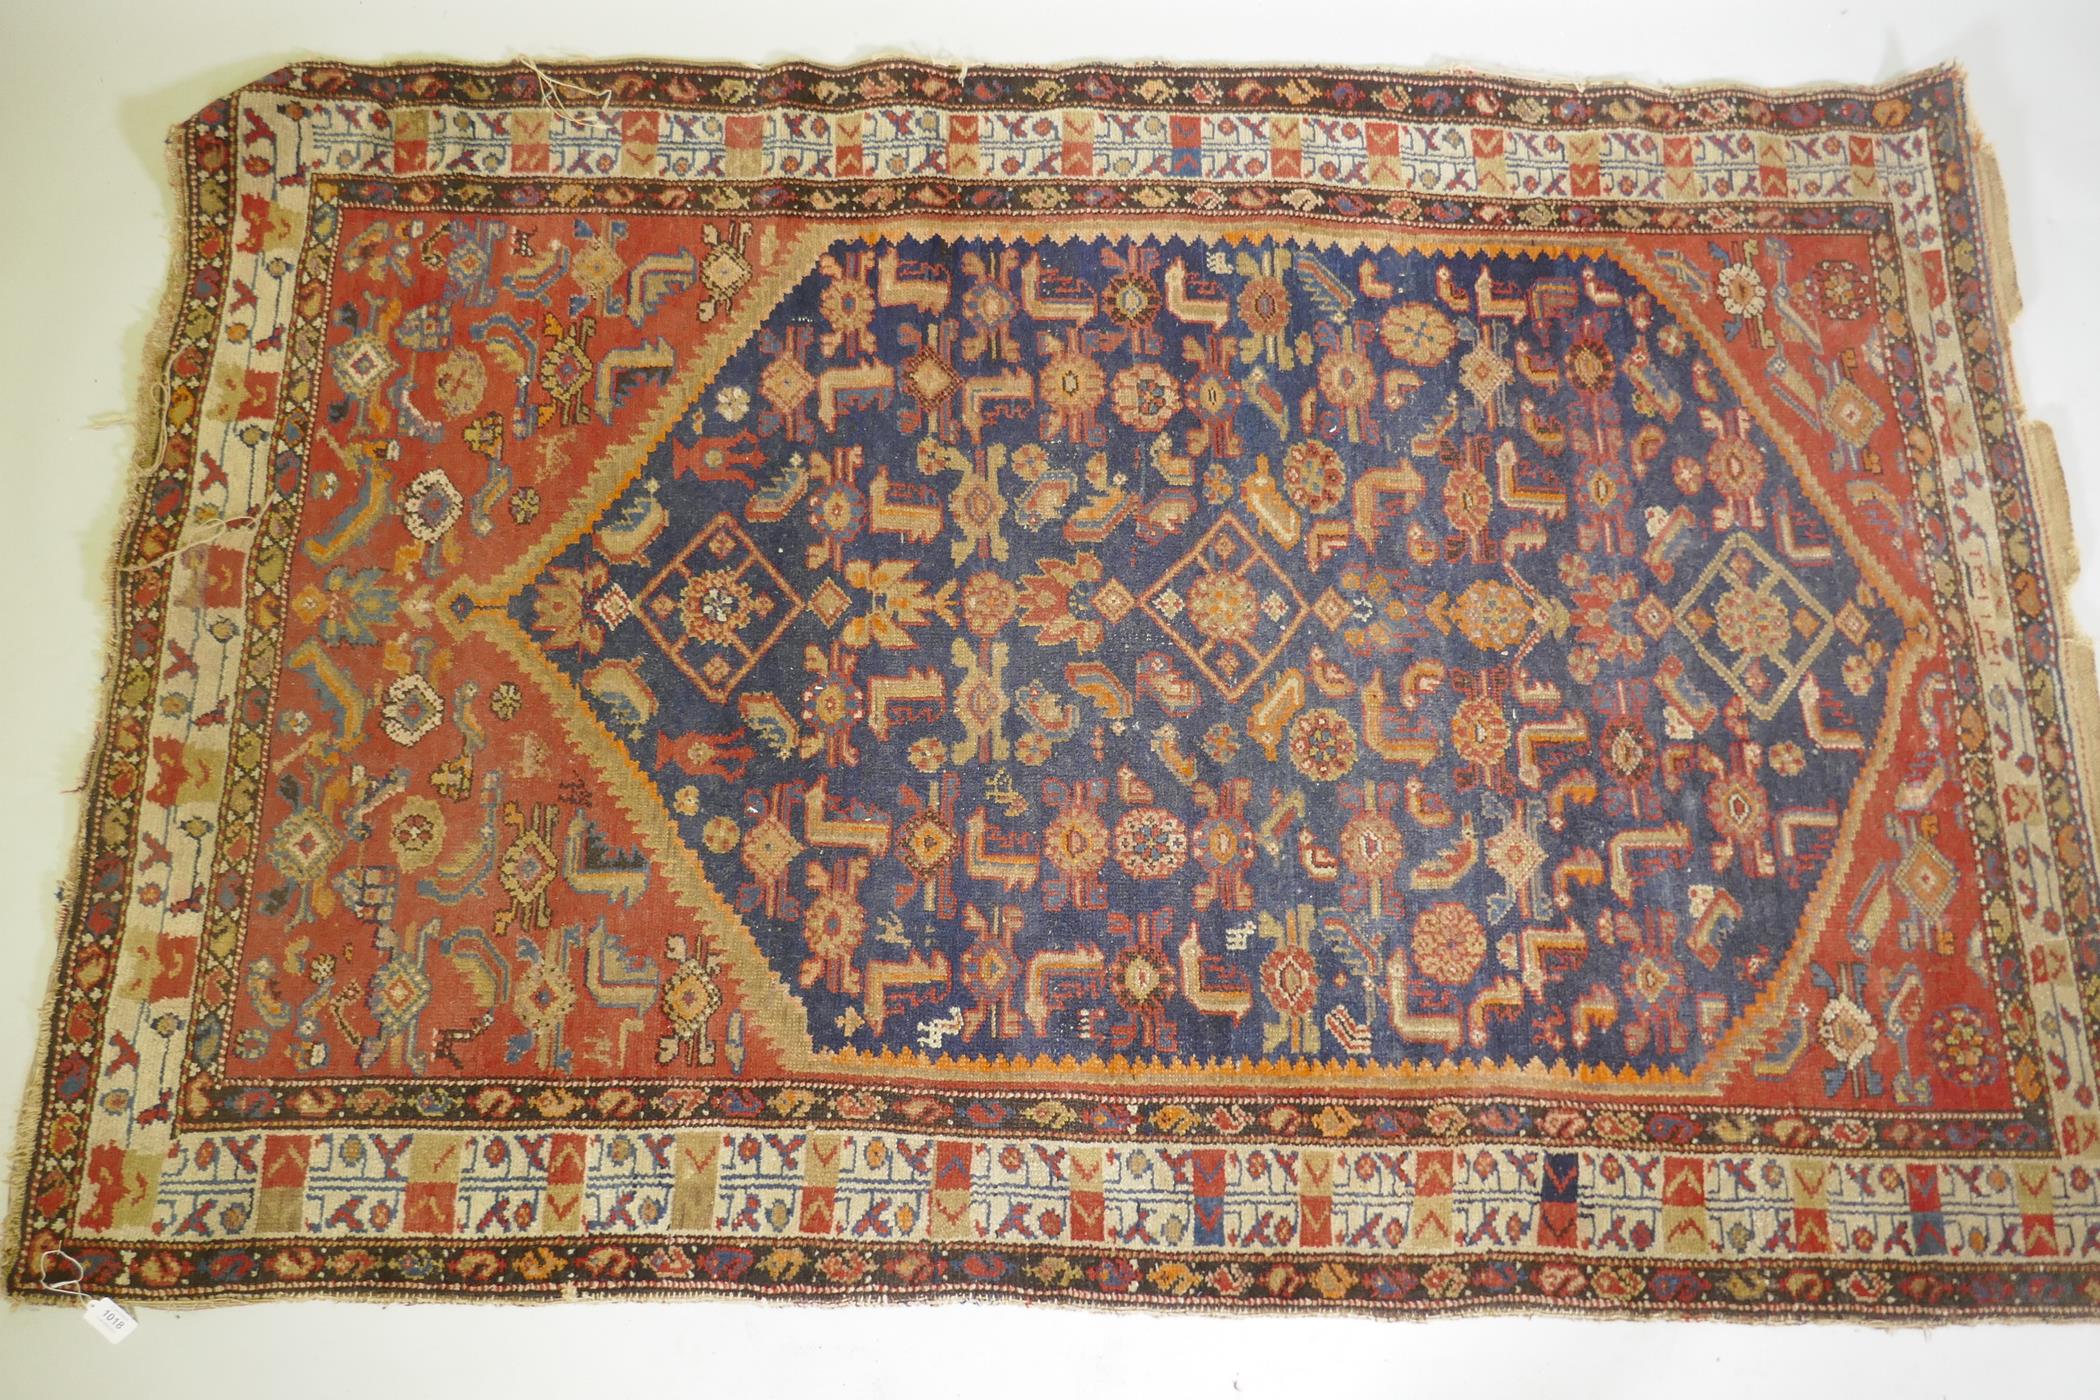 An antique Persian hand woven wool carpet, with medallion design on a red and blue field with